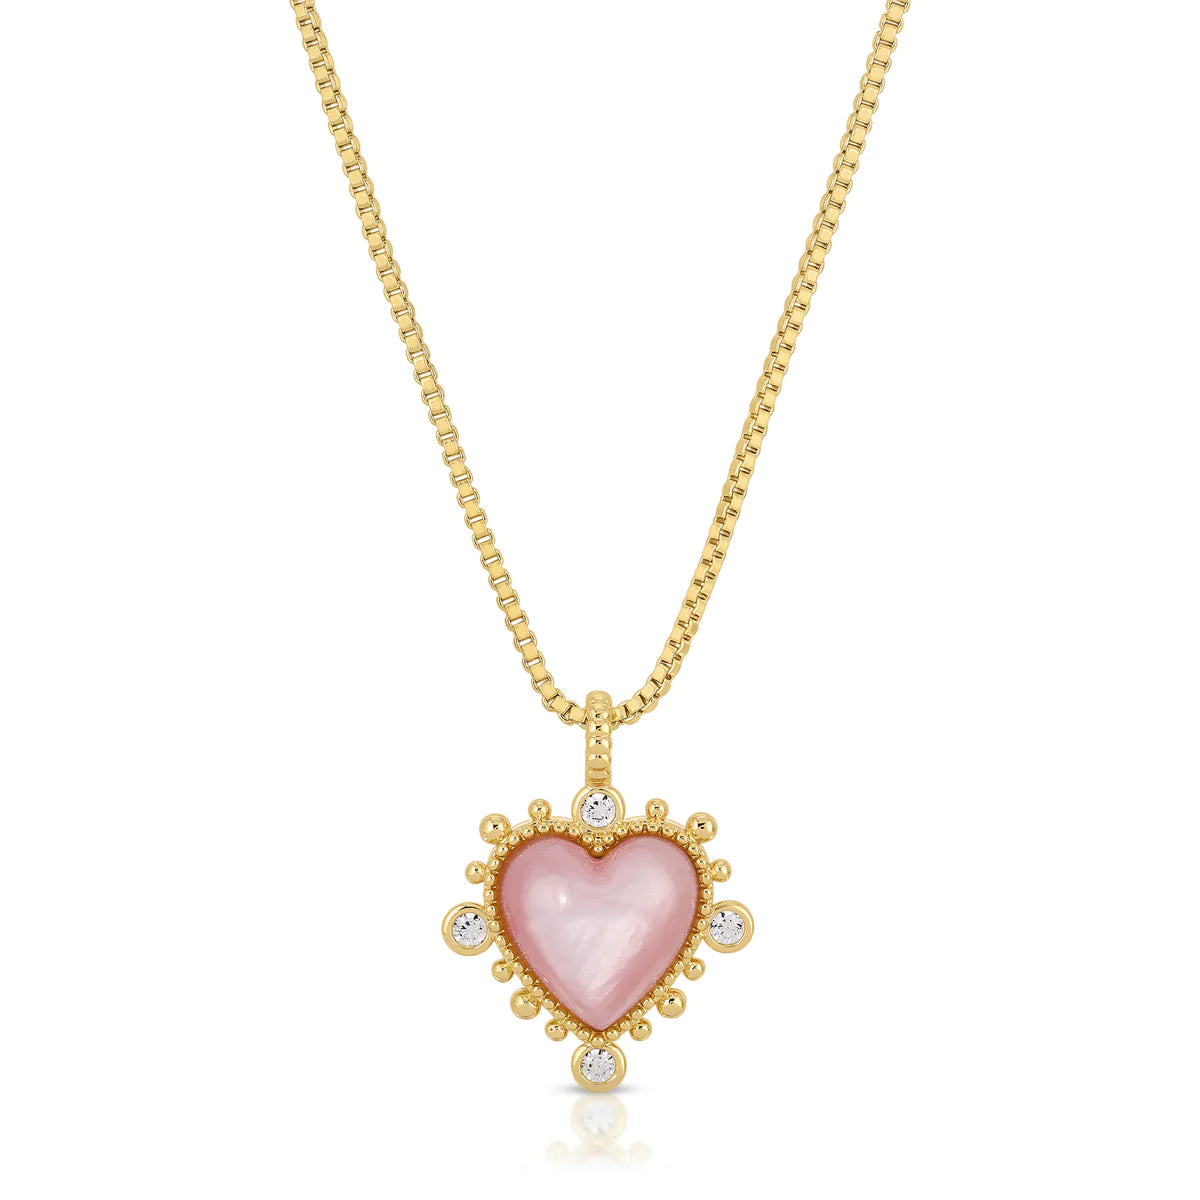 Heavenly Heart Necklace in Pink Shell